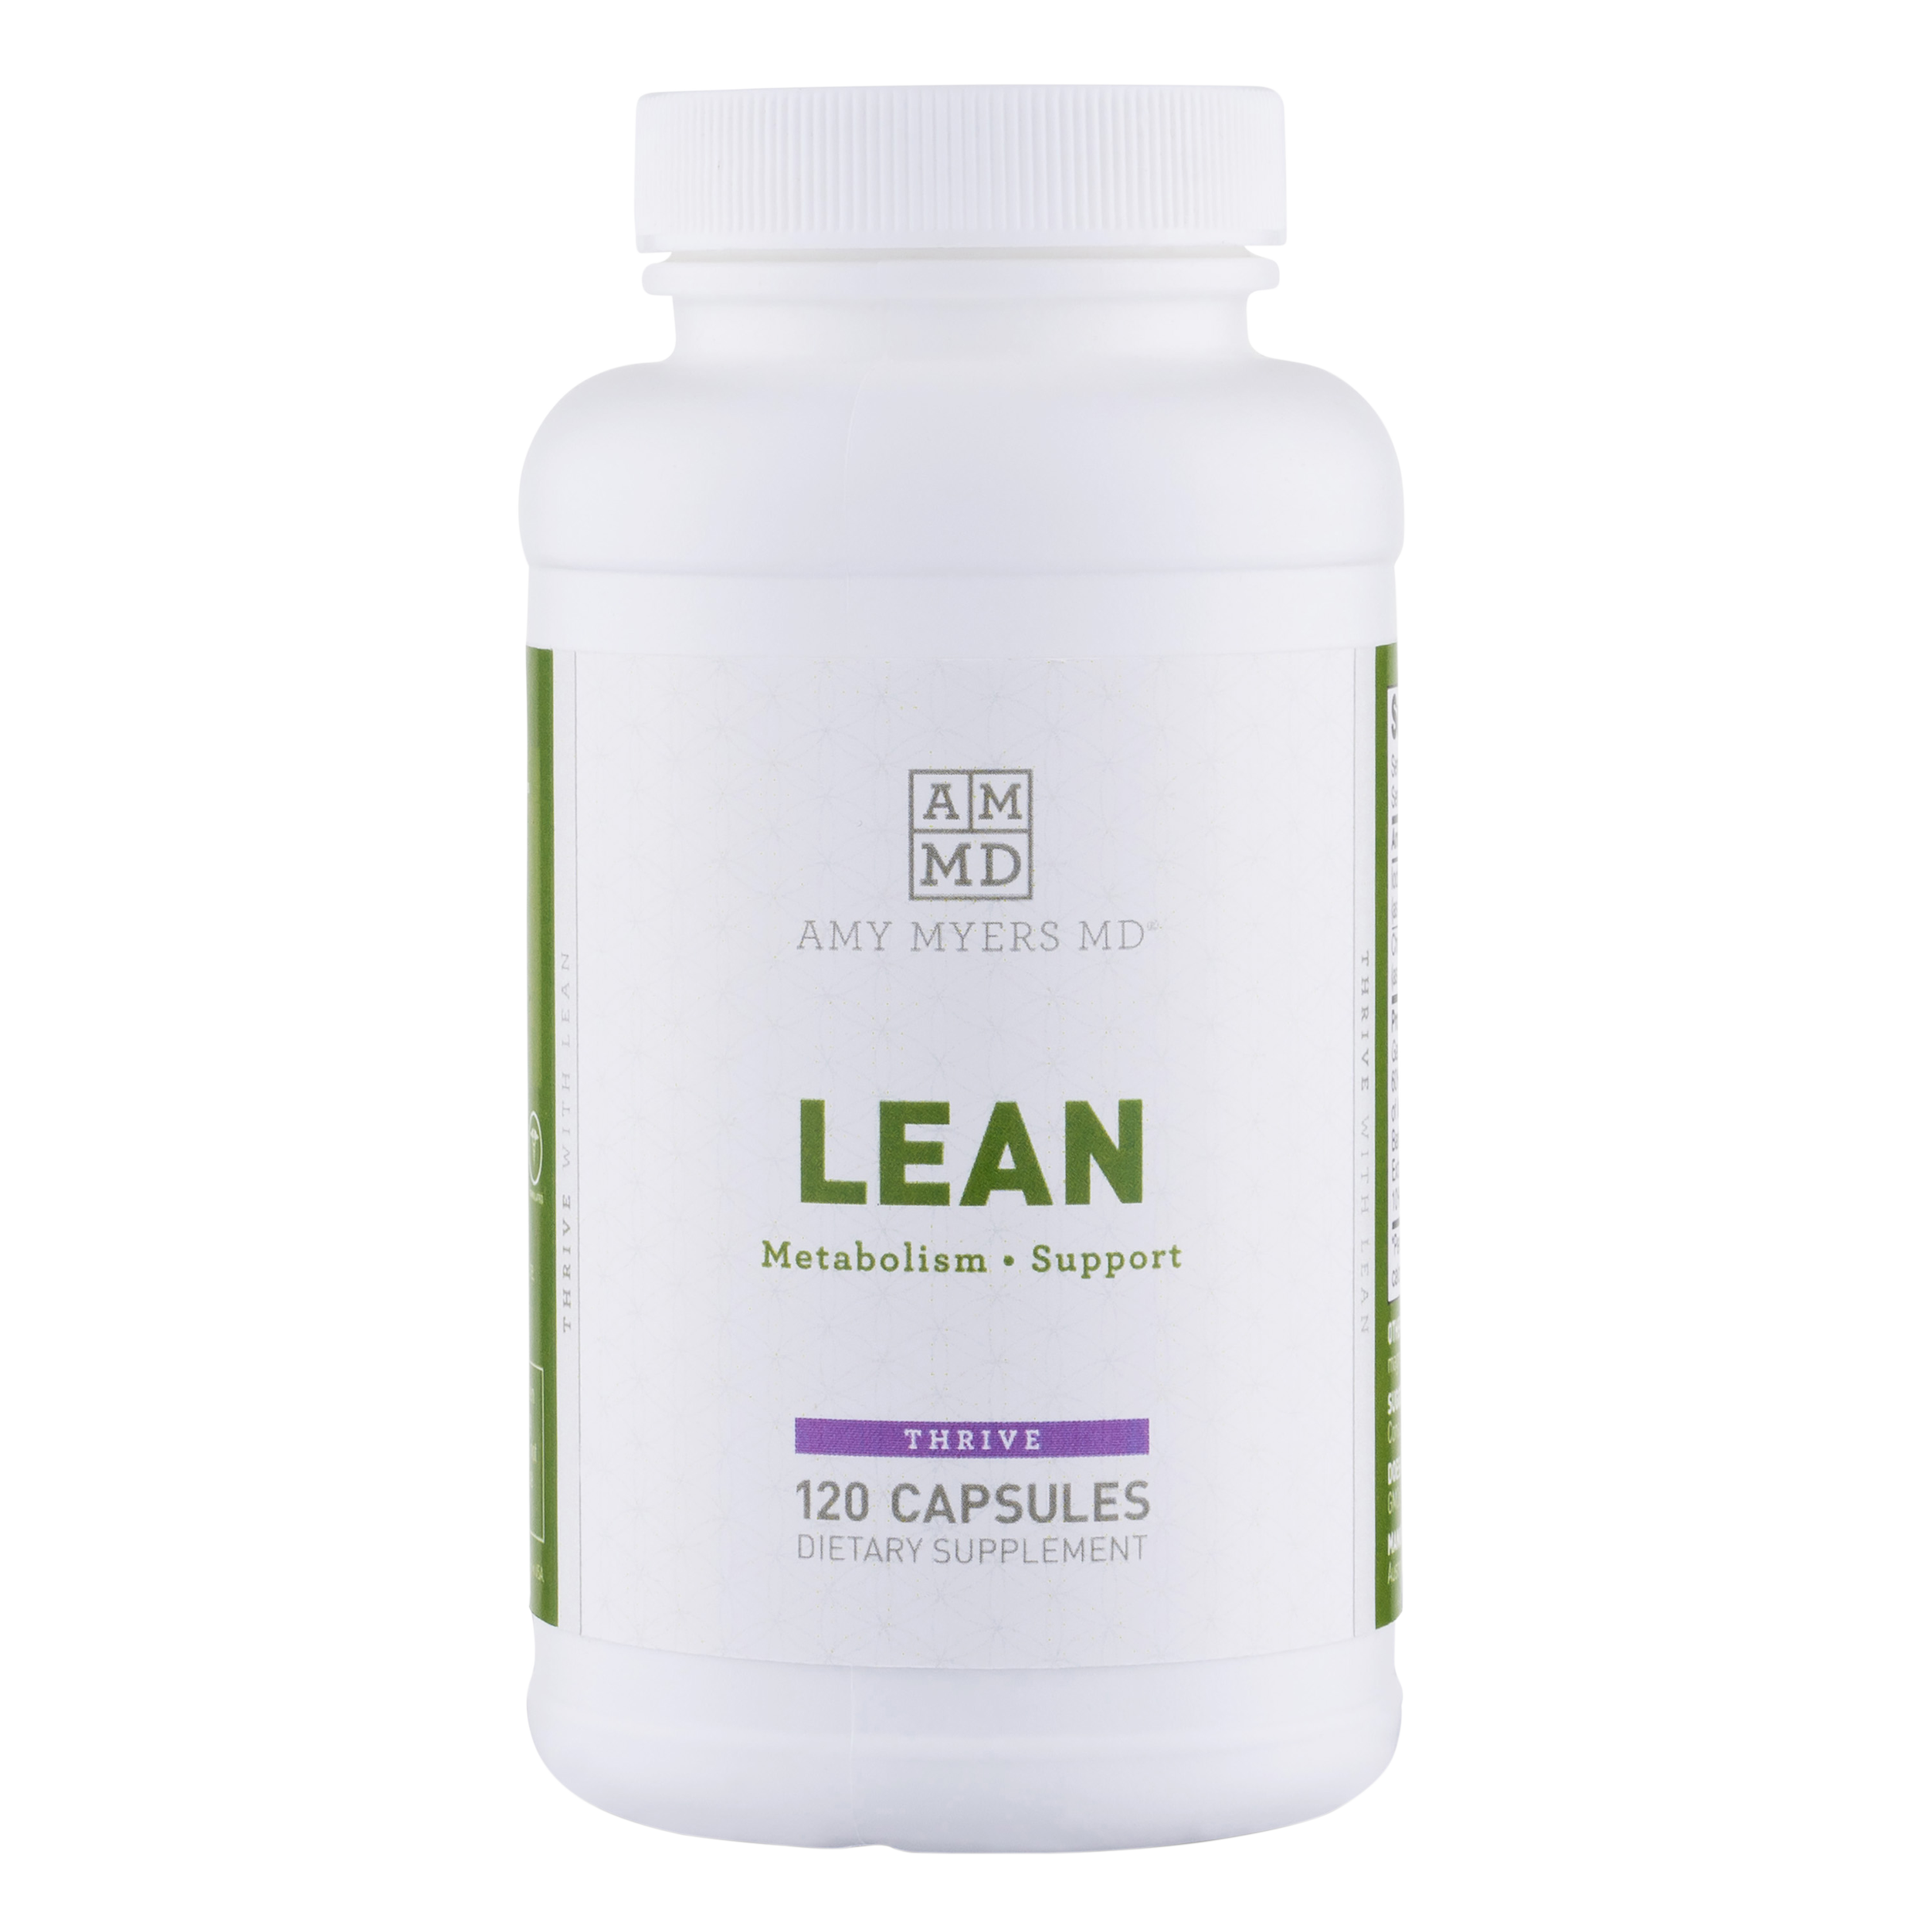 Lean Metabolism Support - 120 Capsules | Amy Myers MD